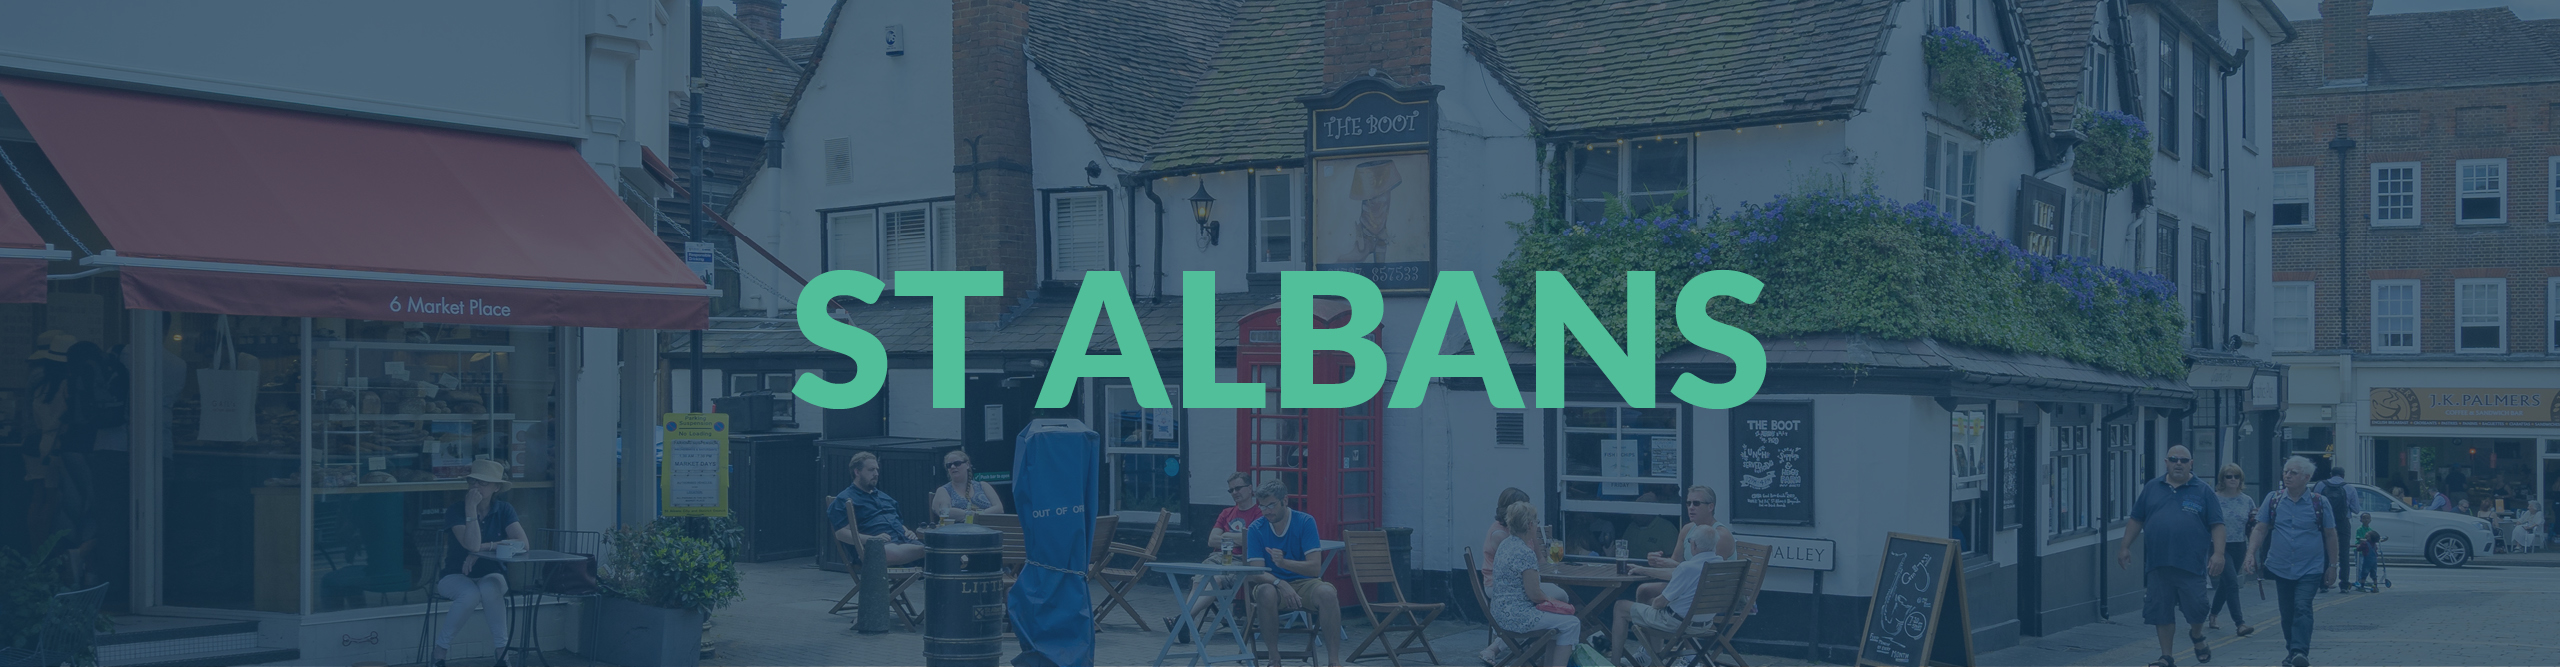 The Leading Marketing Agency of St Albans